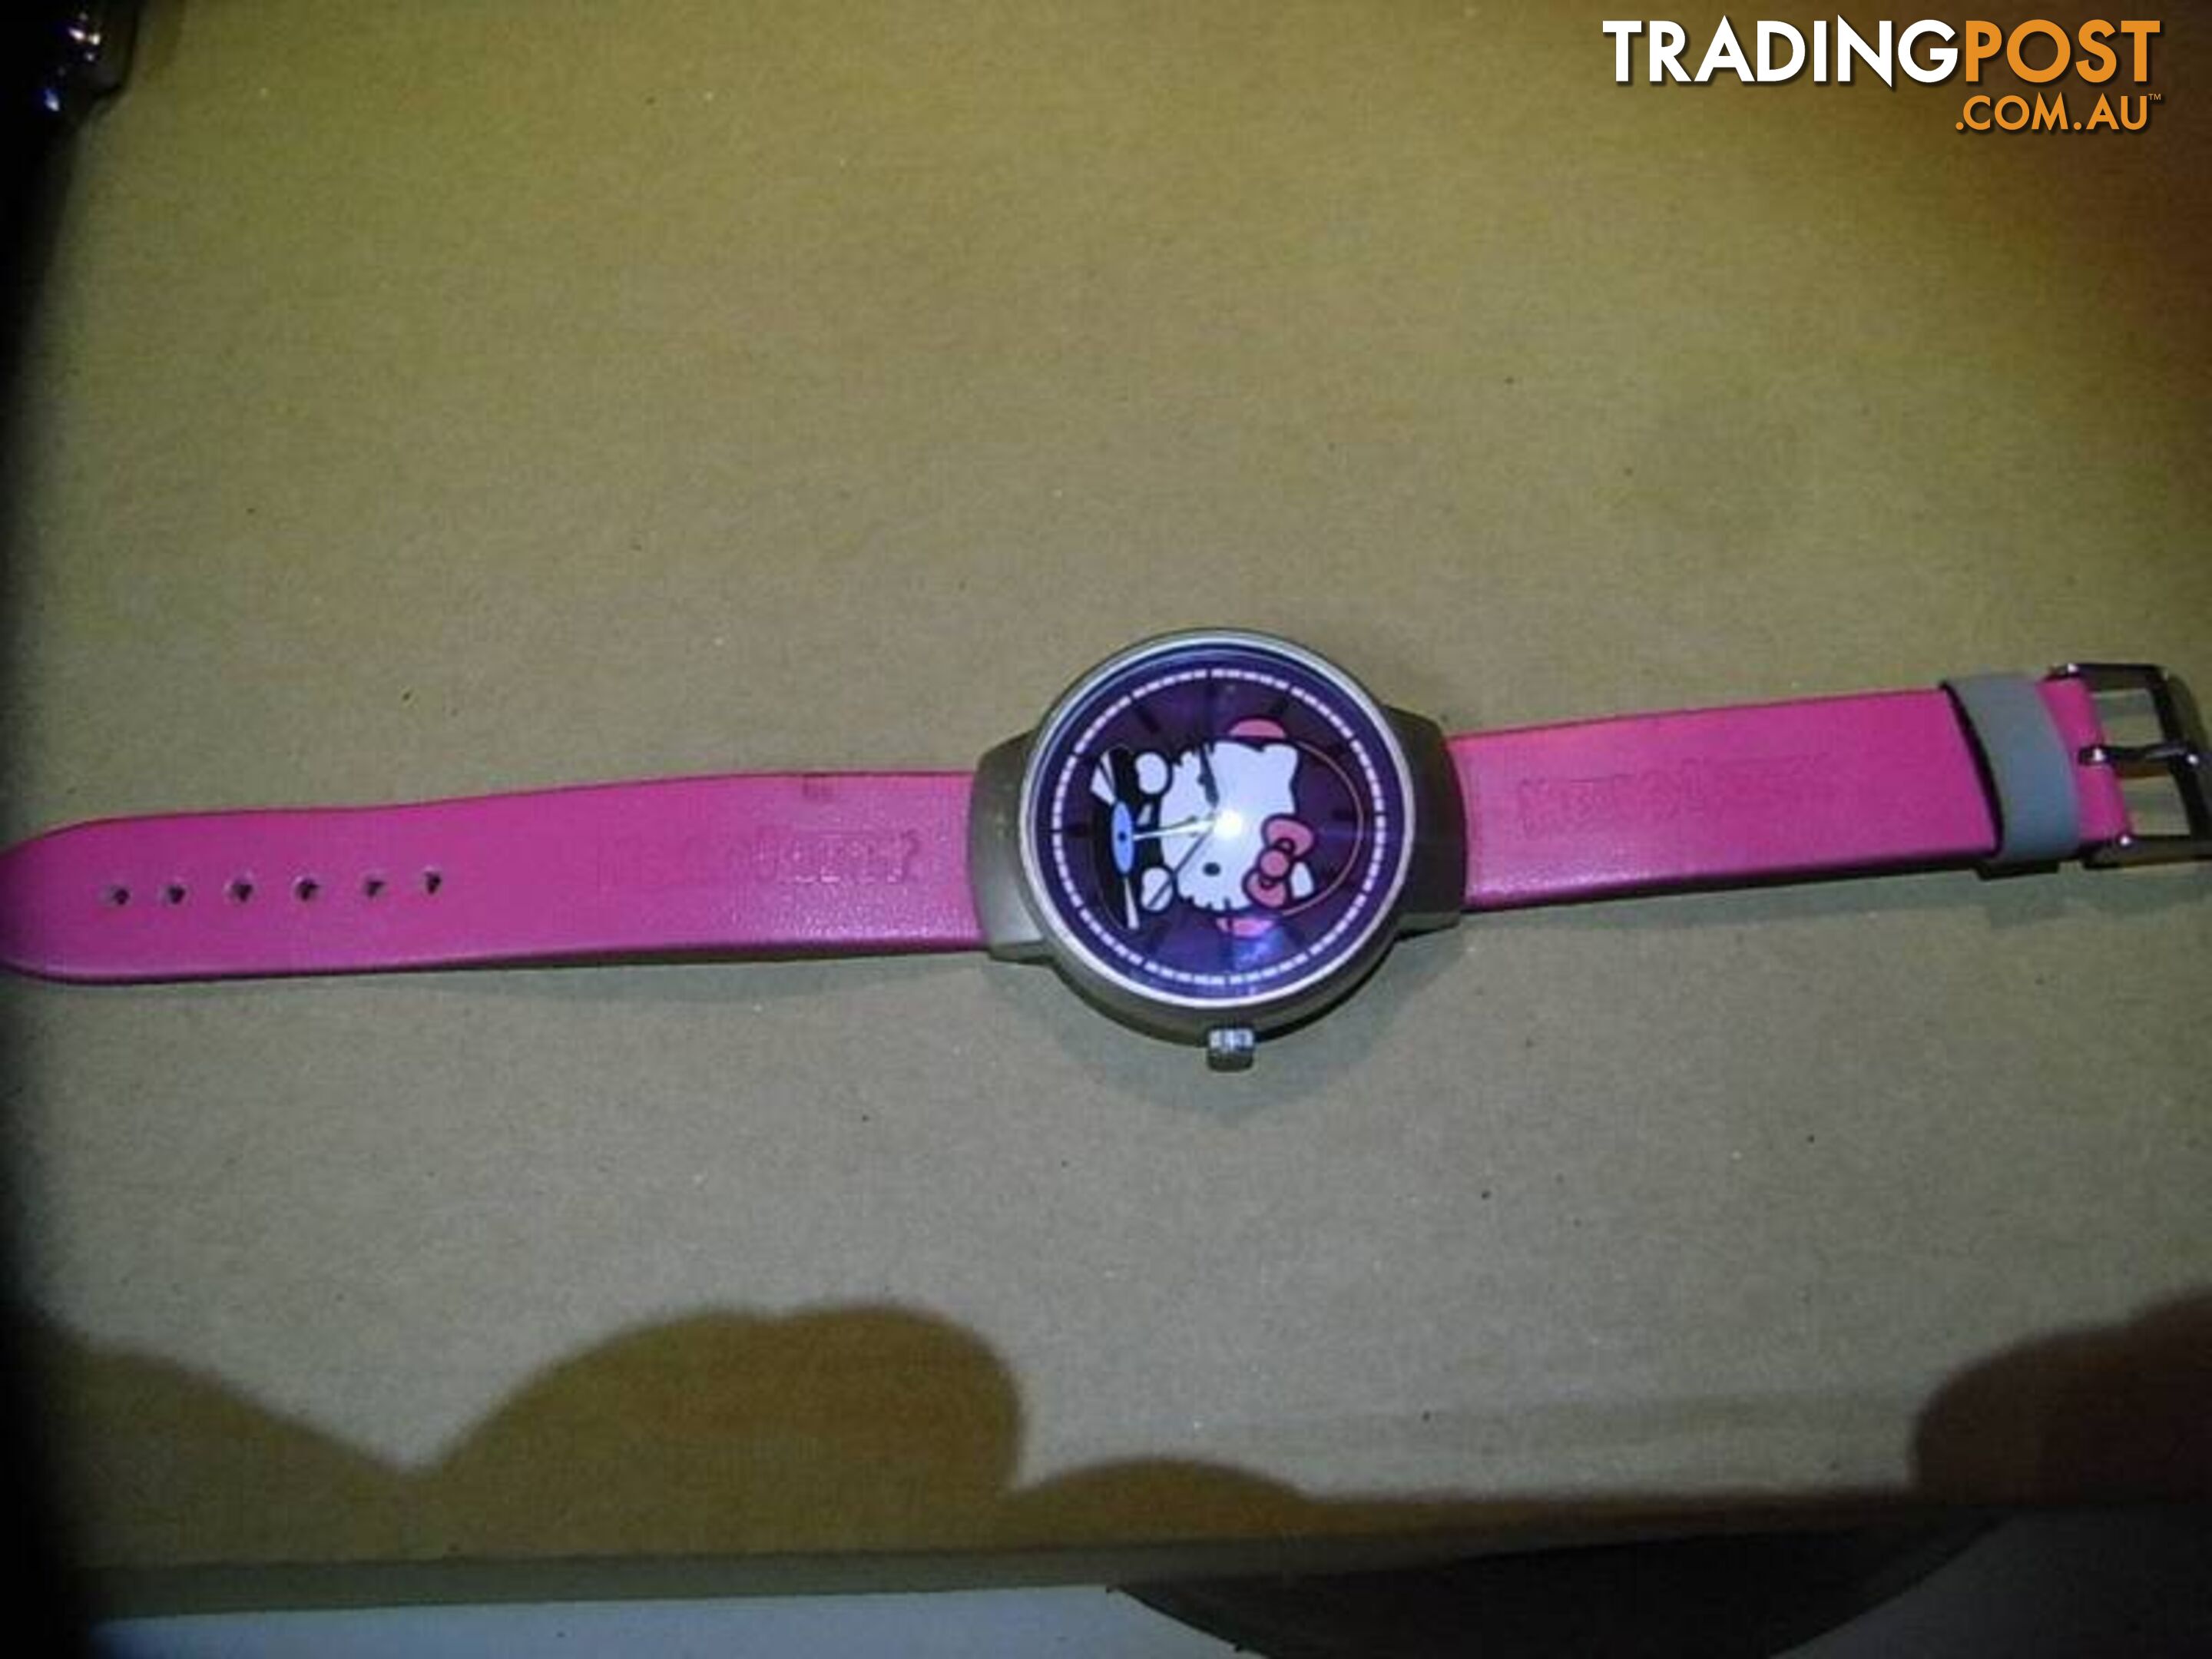 SANRIO LICENCED PRODUCT HELLO KITTY WATCH BRAND NEW